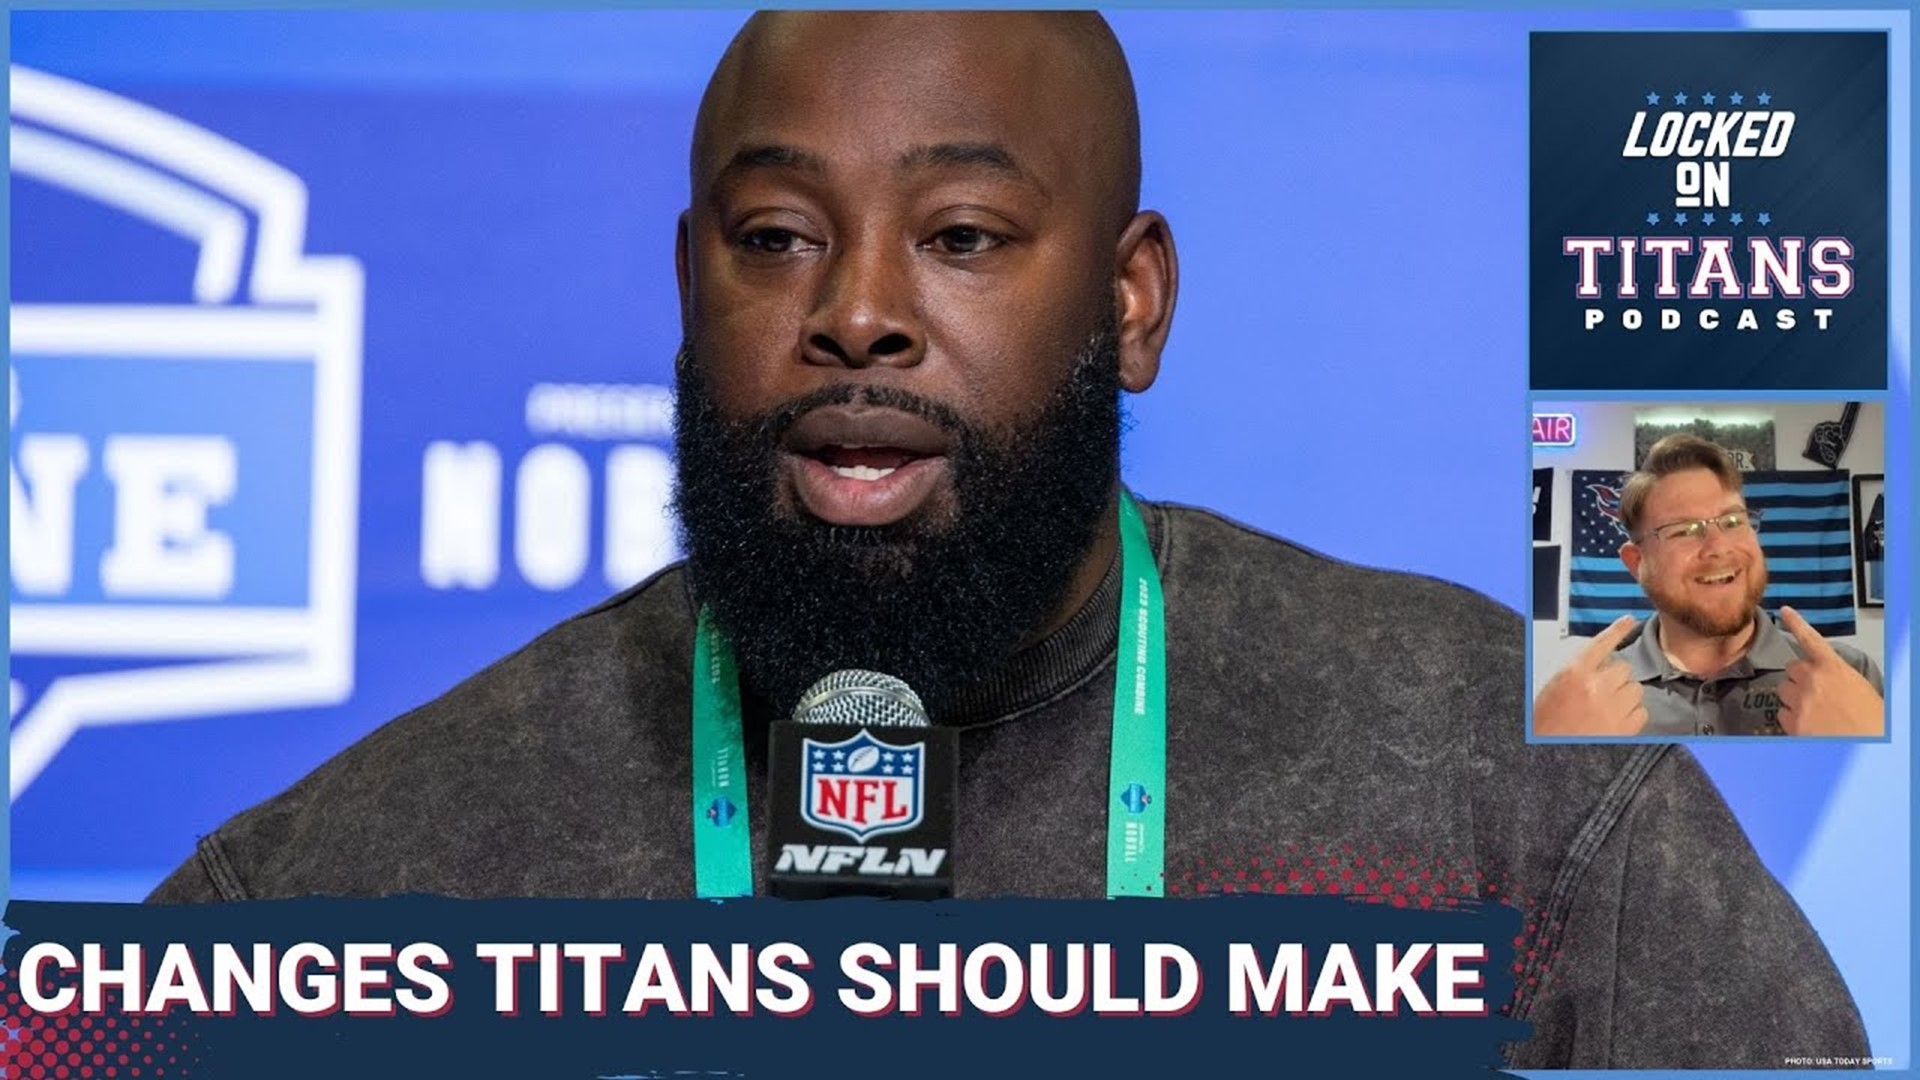 What would you do if you were the Titans general manager for a day? Tyler answers that questions and talks about changing the medical process, roster moves and more